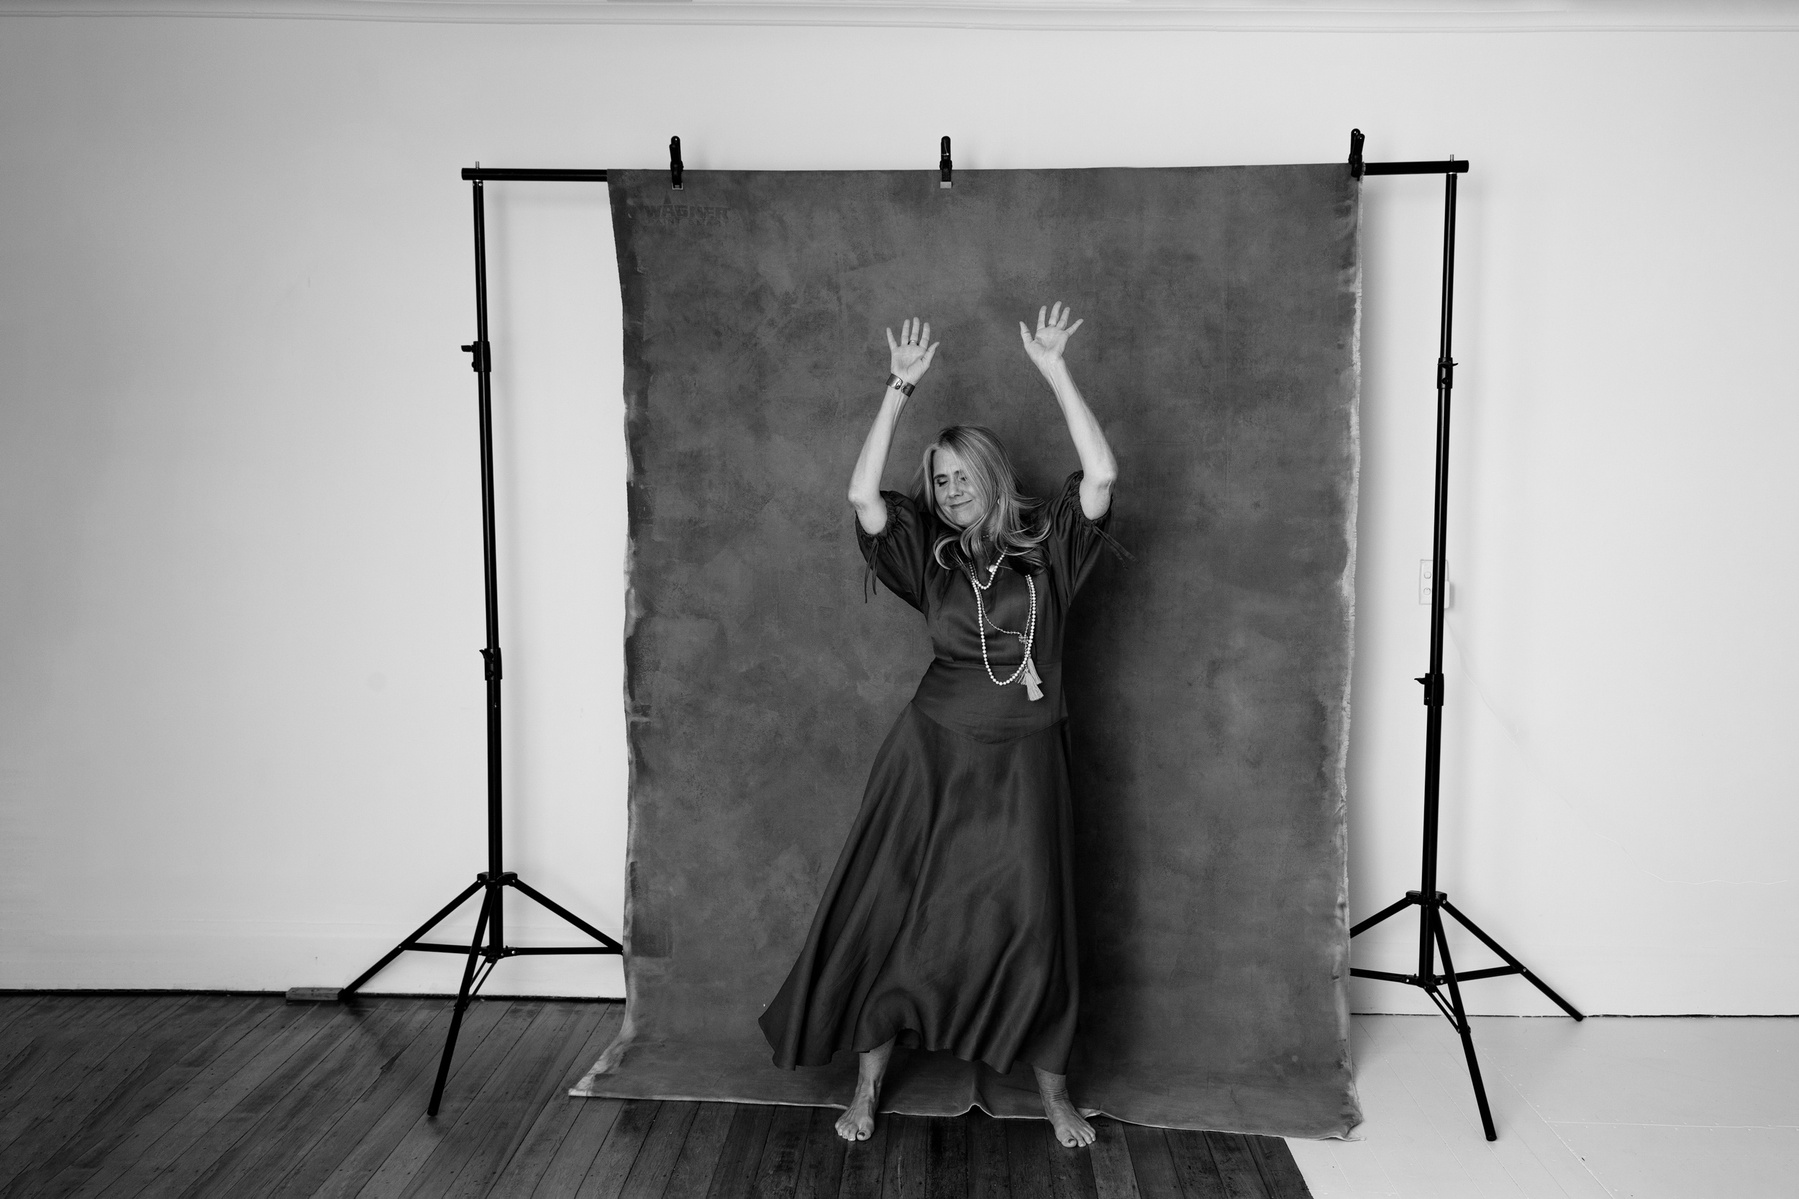 A woman laughs and dances with abandon in front of a photo backdrop